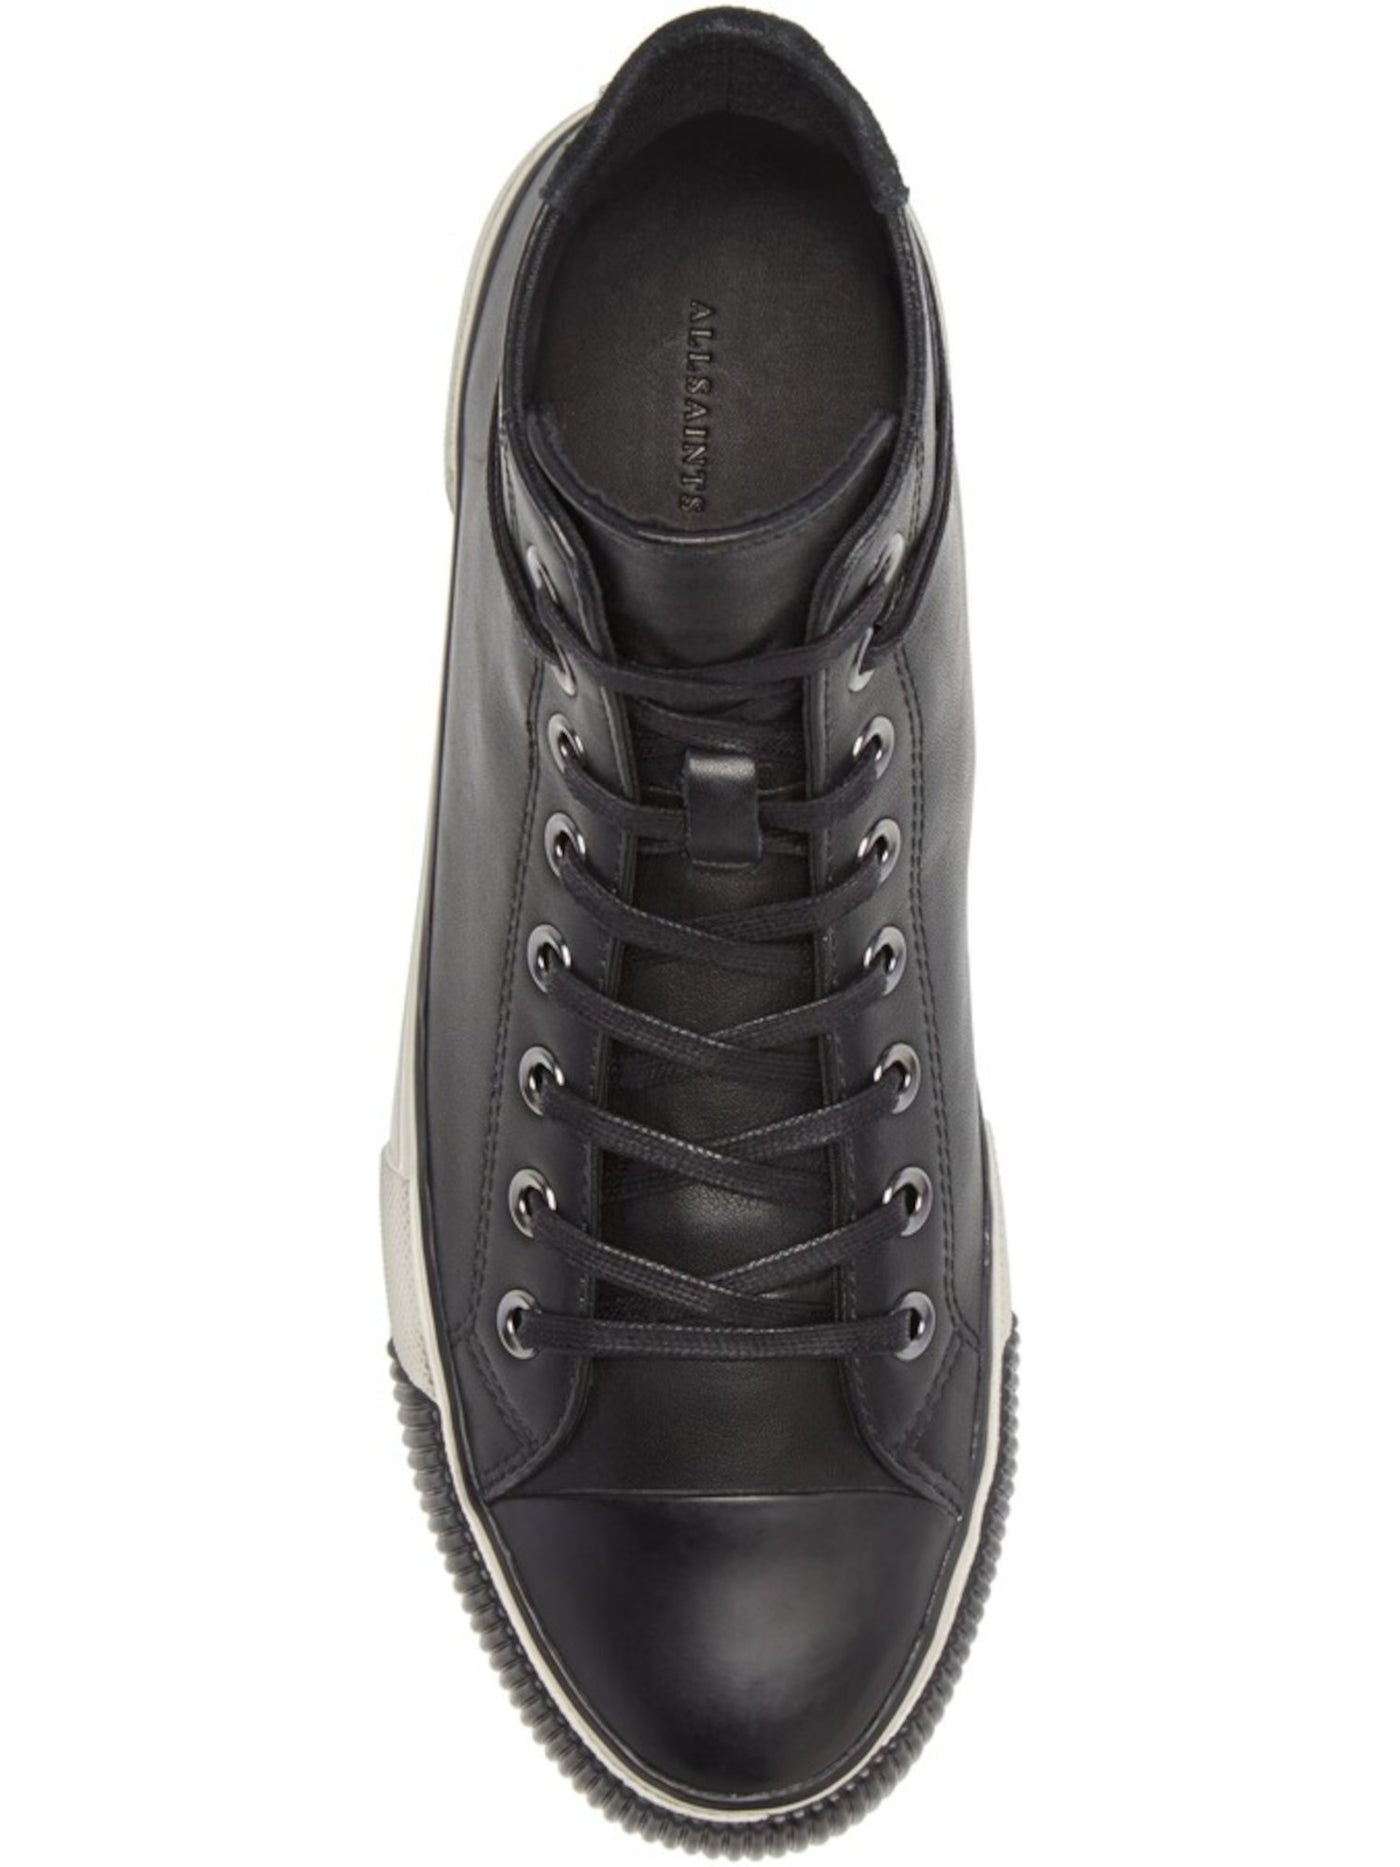 ALLSAINTS Mens Black Comfort Distressed Osun Round Toe Platform Lace-Up Leather Athletic Sneakers 43